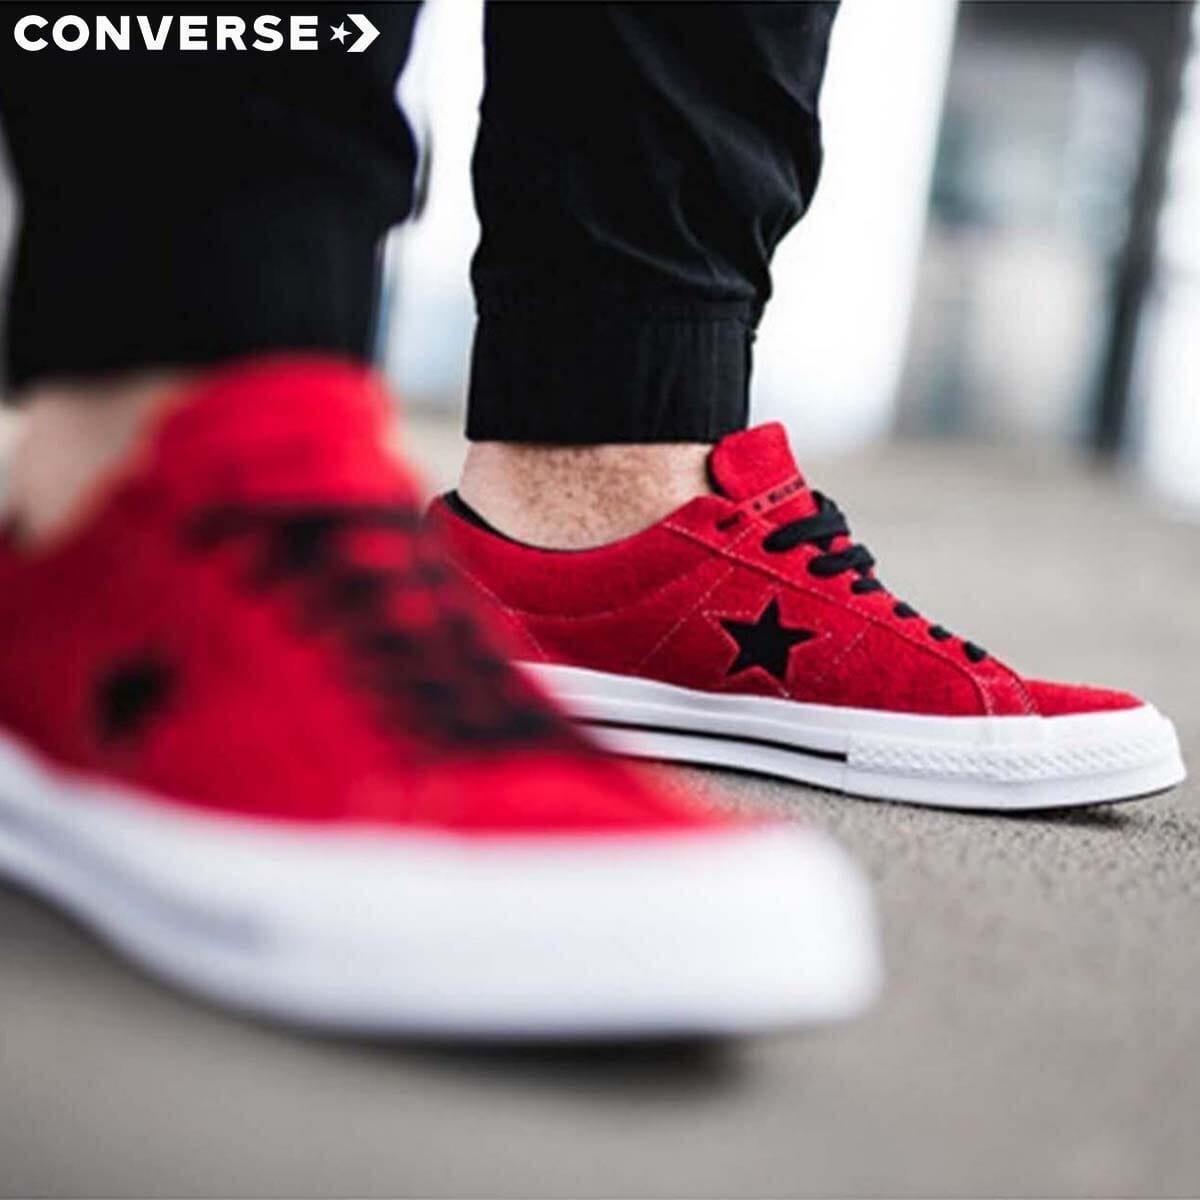 converse one star red suede sneakers for unisex 163246c